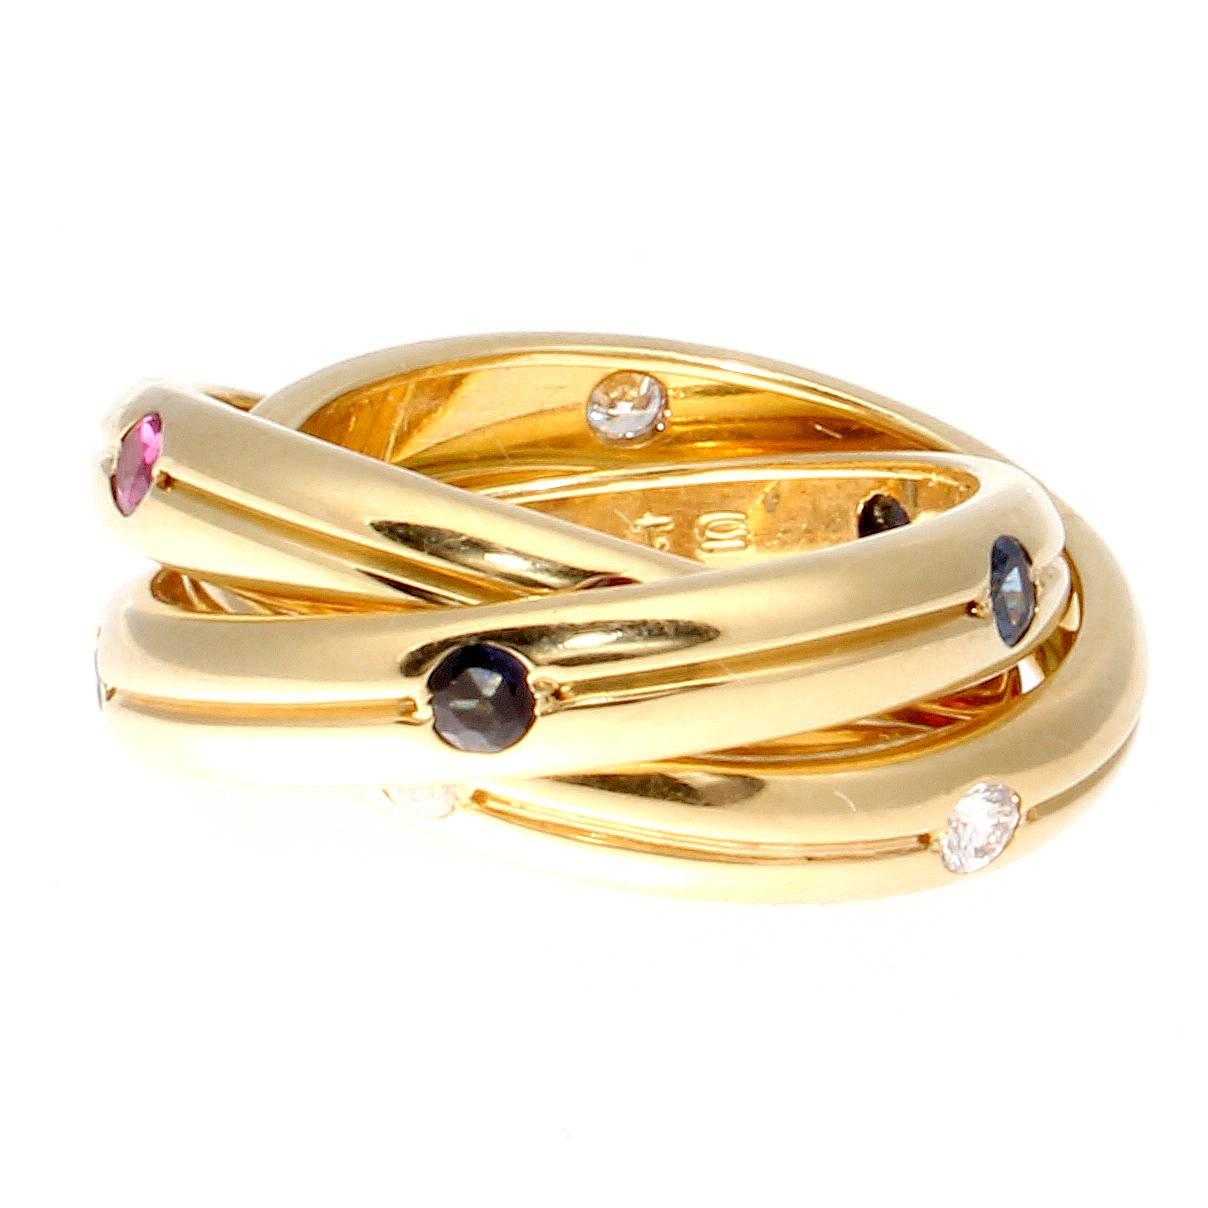 Cartier, elegant and timeless. Fashioned with lively rubies, sapphires and diamonds. Hand crafted in 18k yellow gold.

Ring size 6.